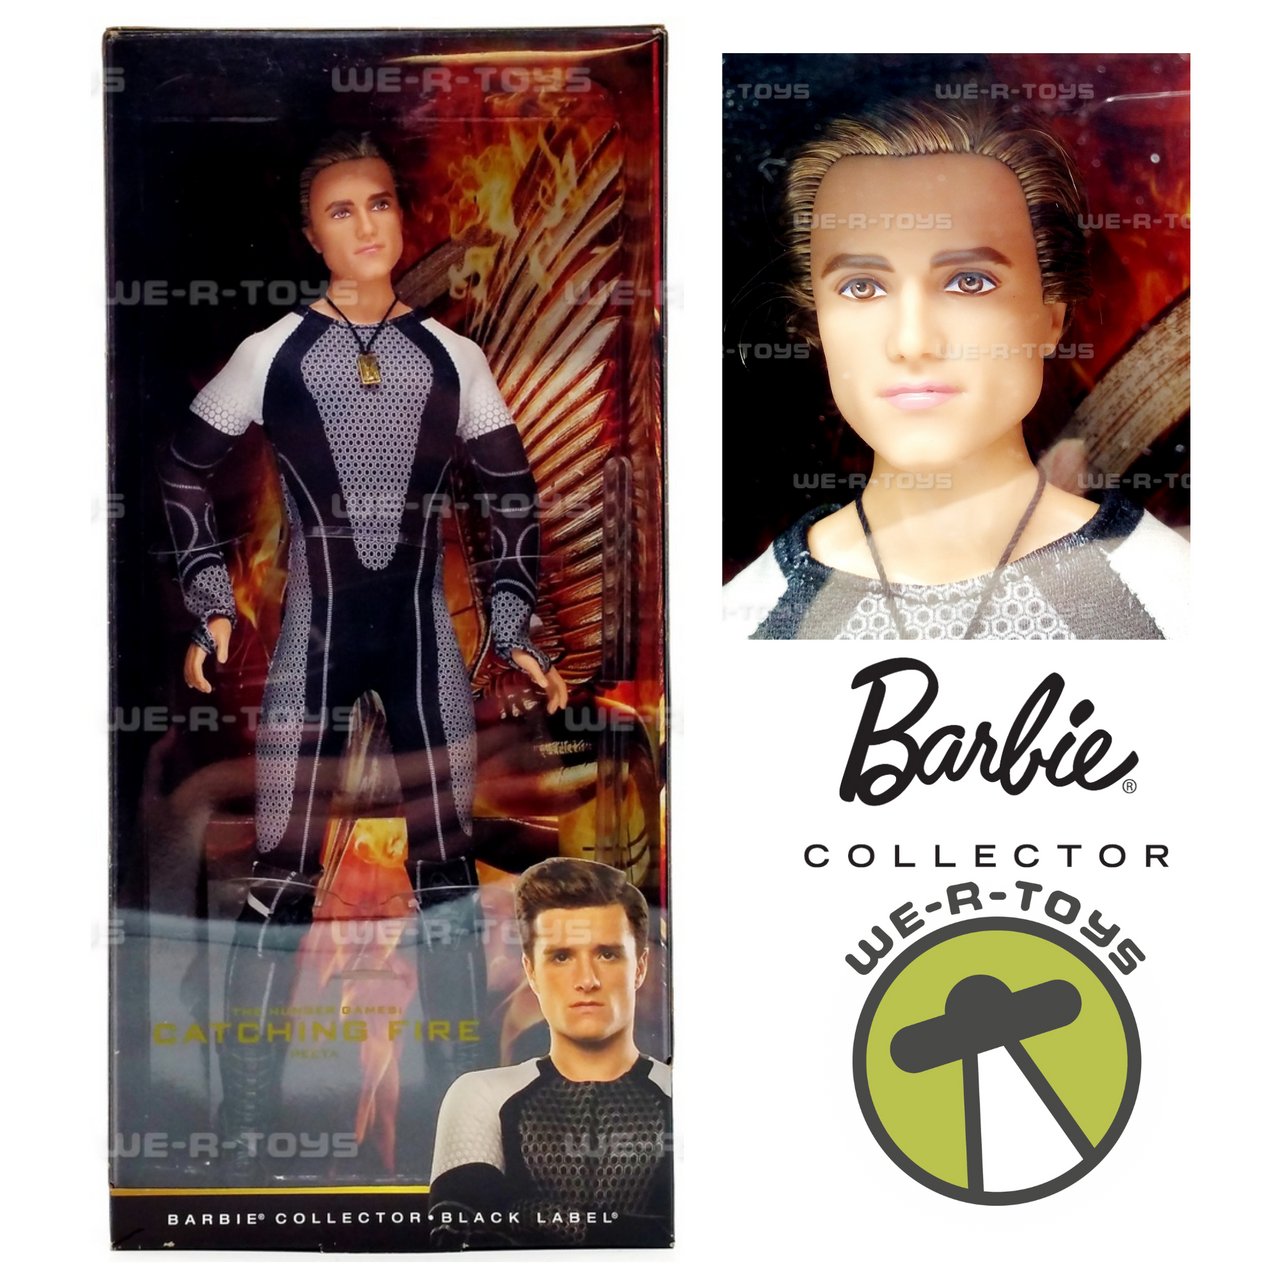 Barbie Collector The Hunger Games Catching Fire Peeta Doll Black